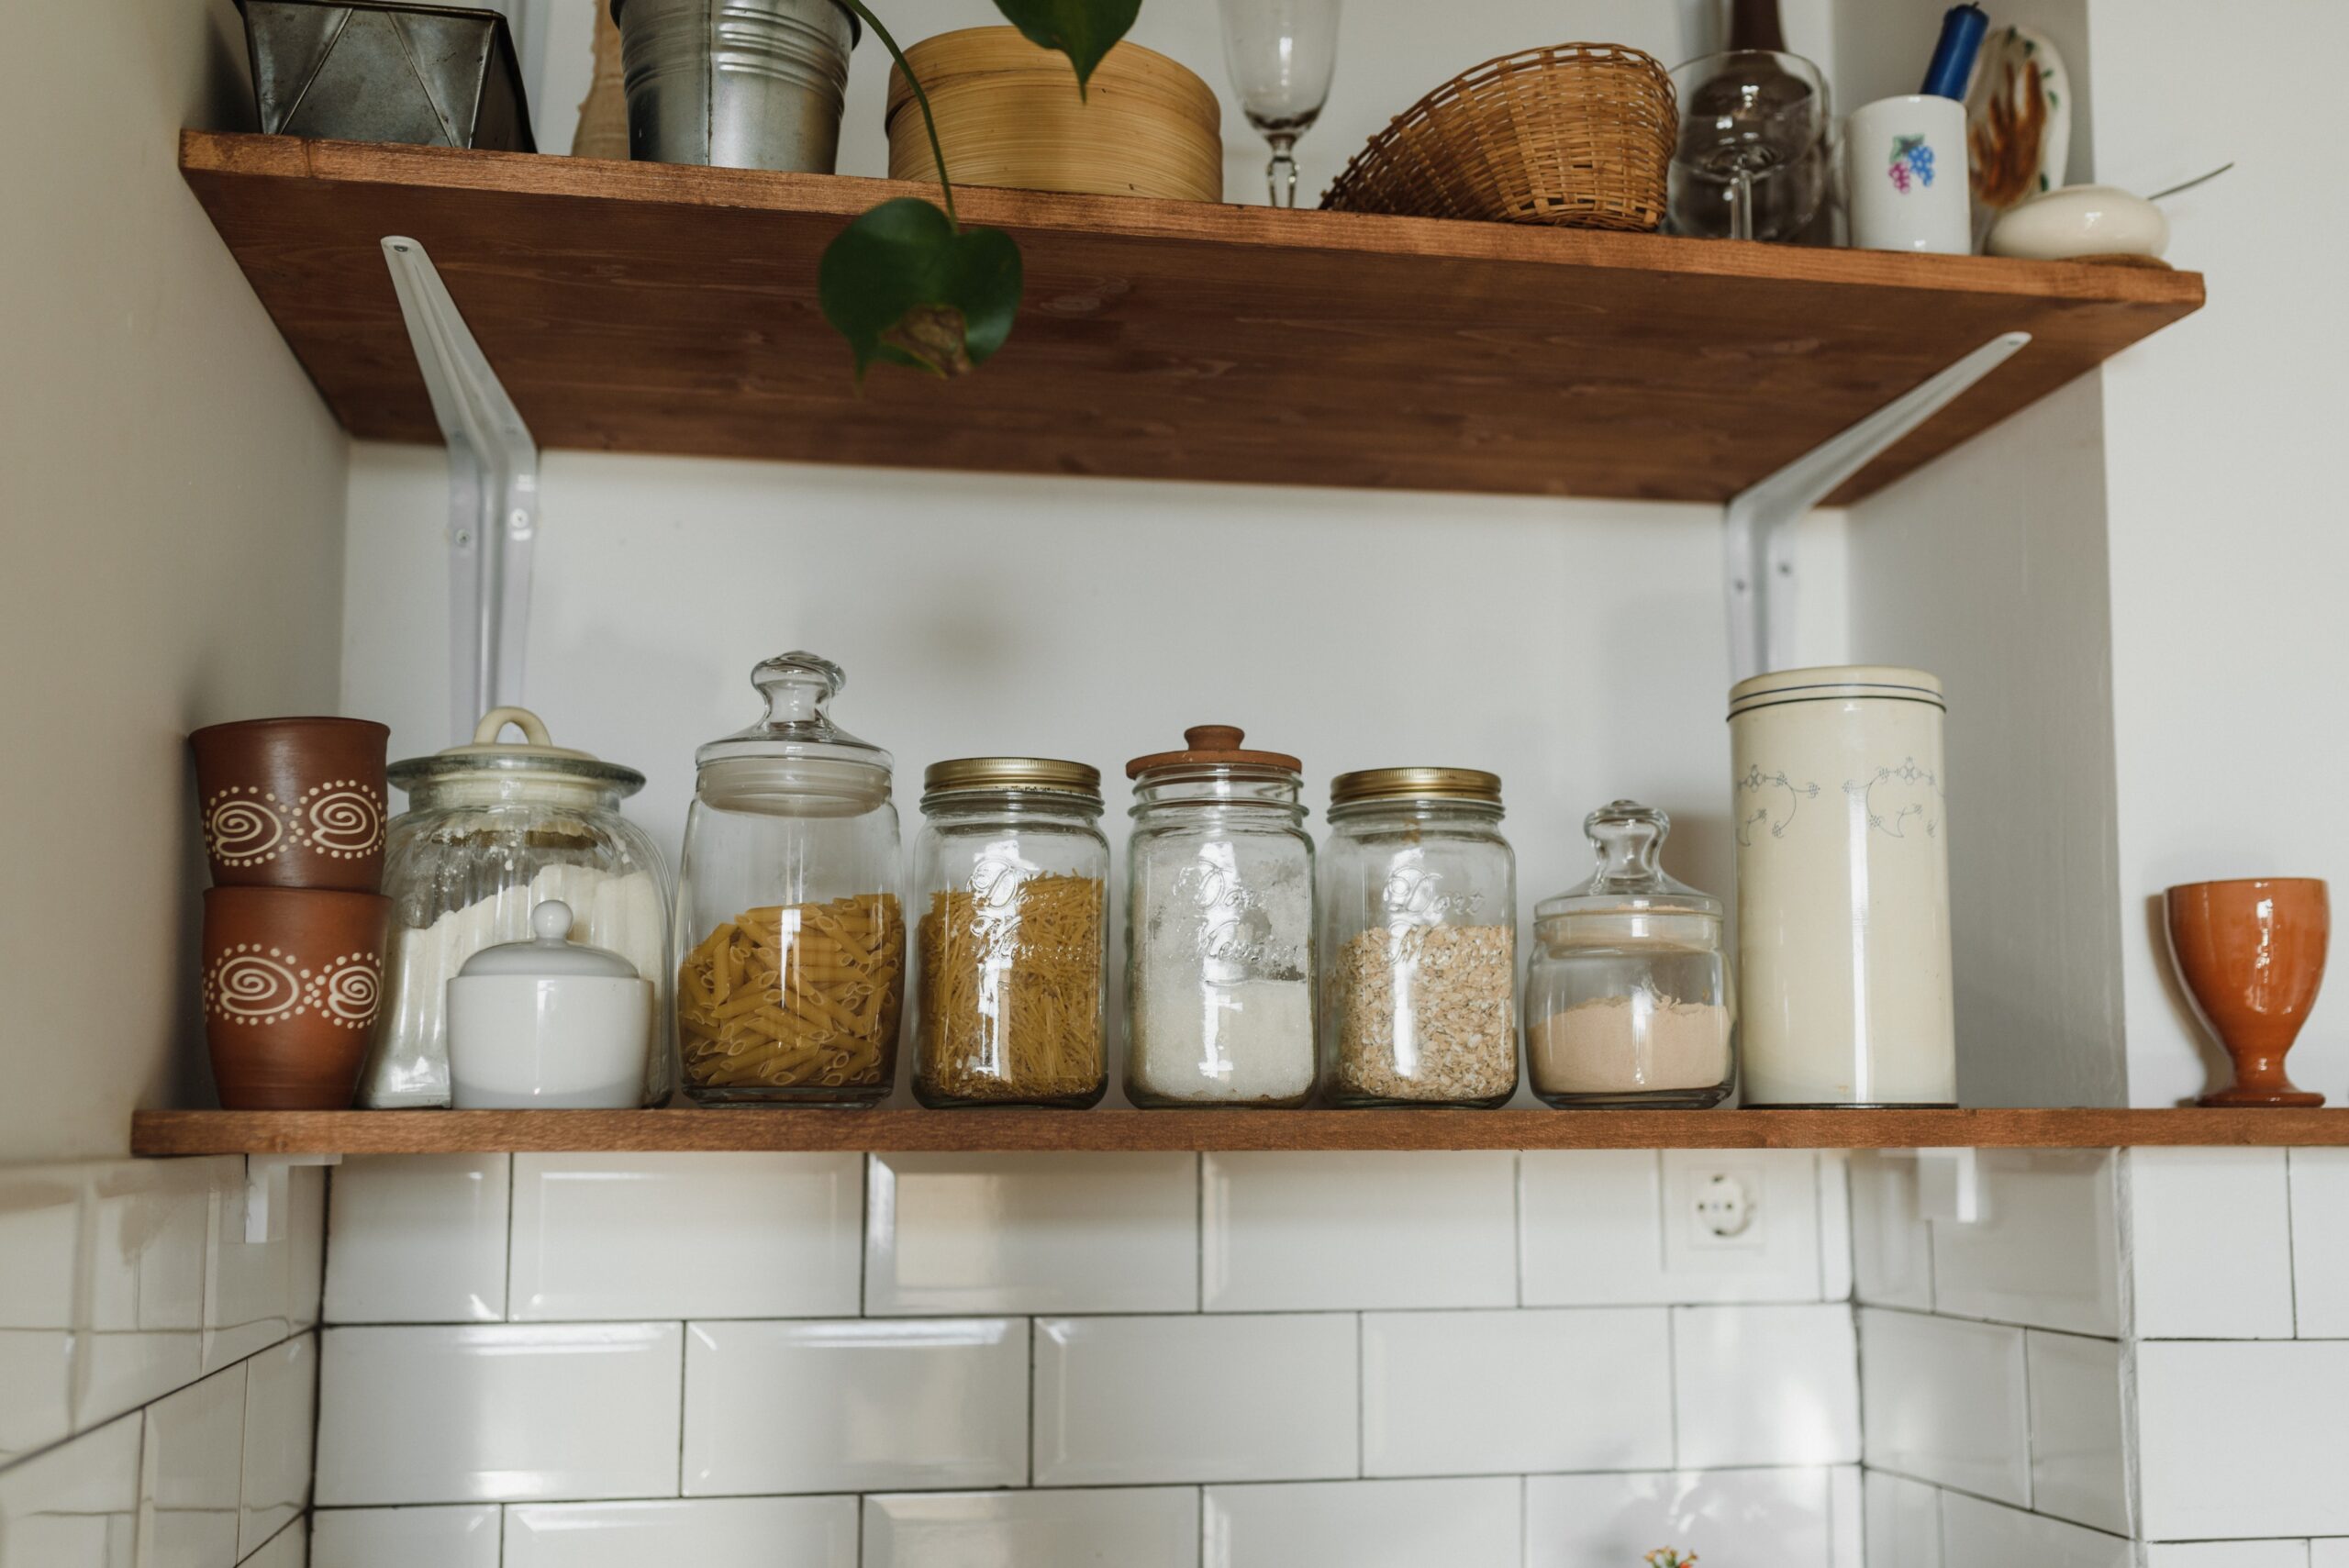 Kitchen racks organized with spice jars and cooking utensils